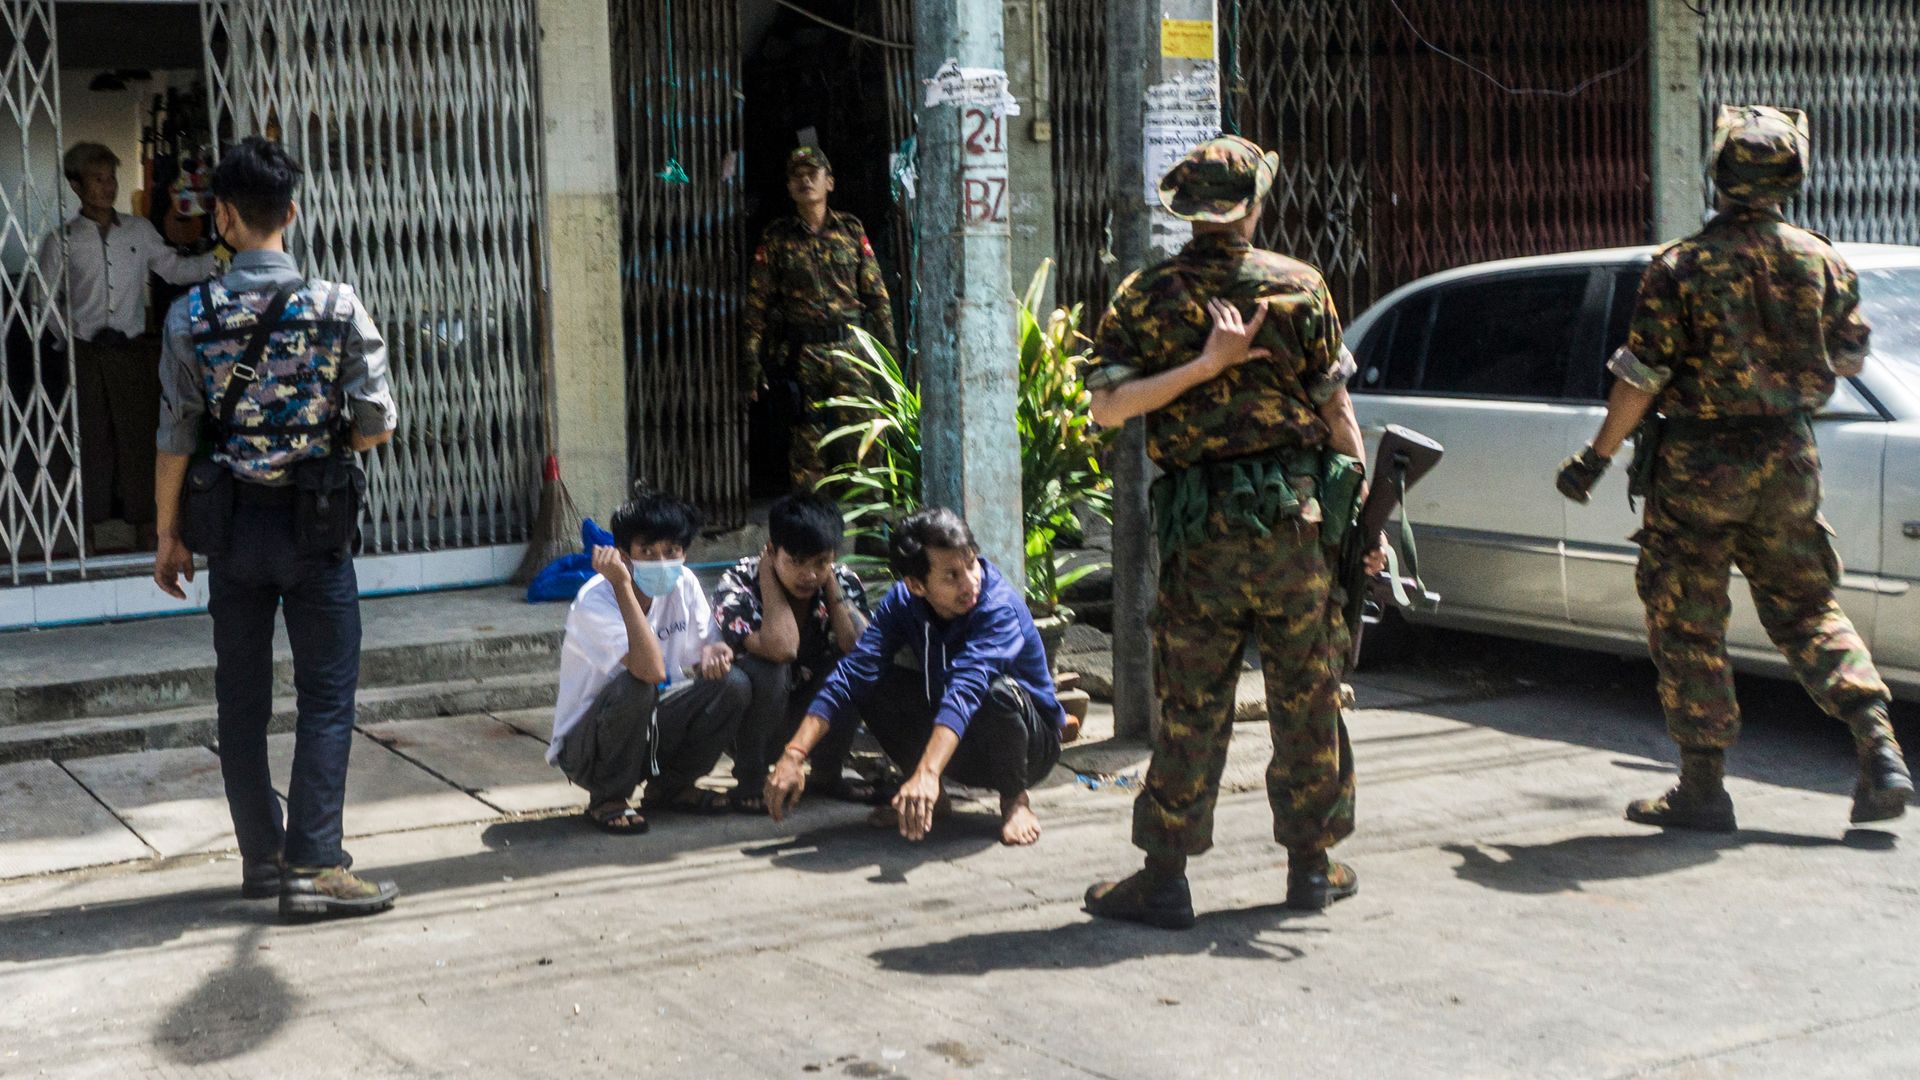 Myanmar security forces detaining protesters in Yangon in May 2021.